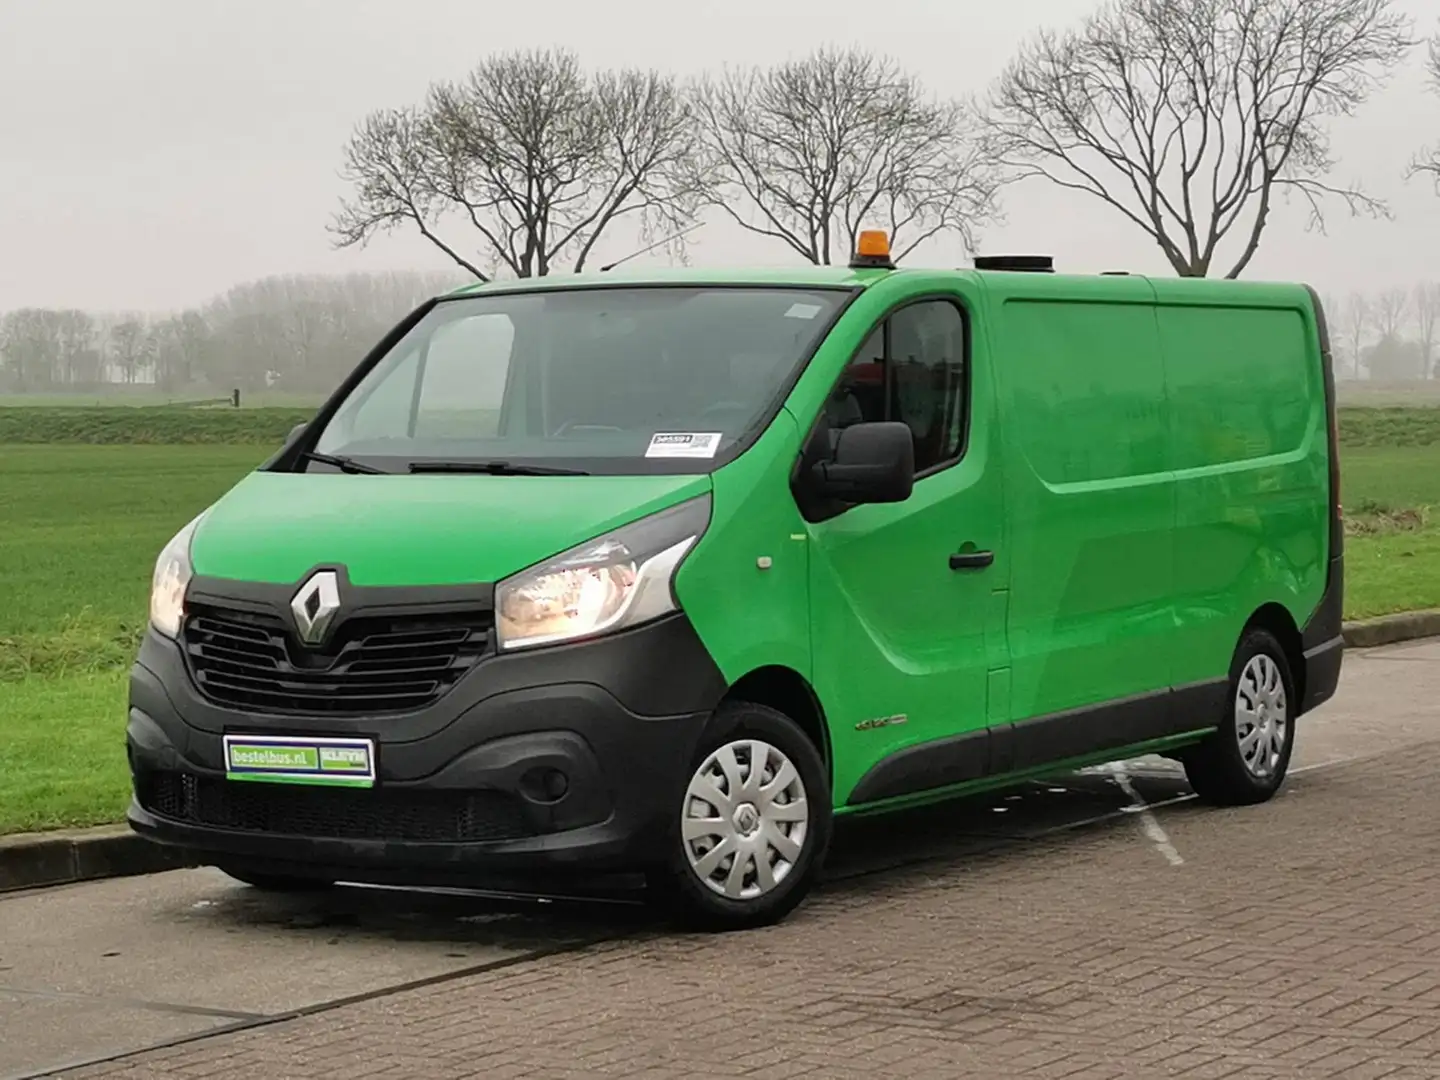 Renault Trafic 1.6 DCI dci 120 l2h1 Groen - 2